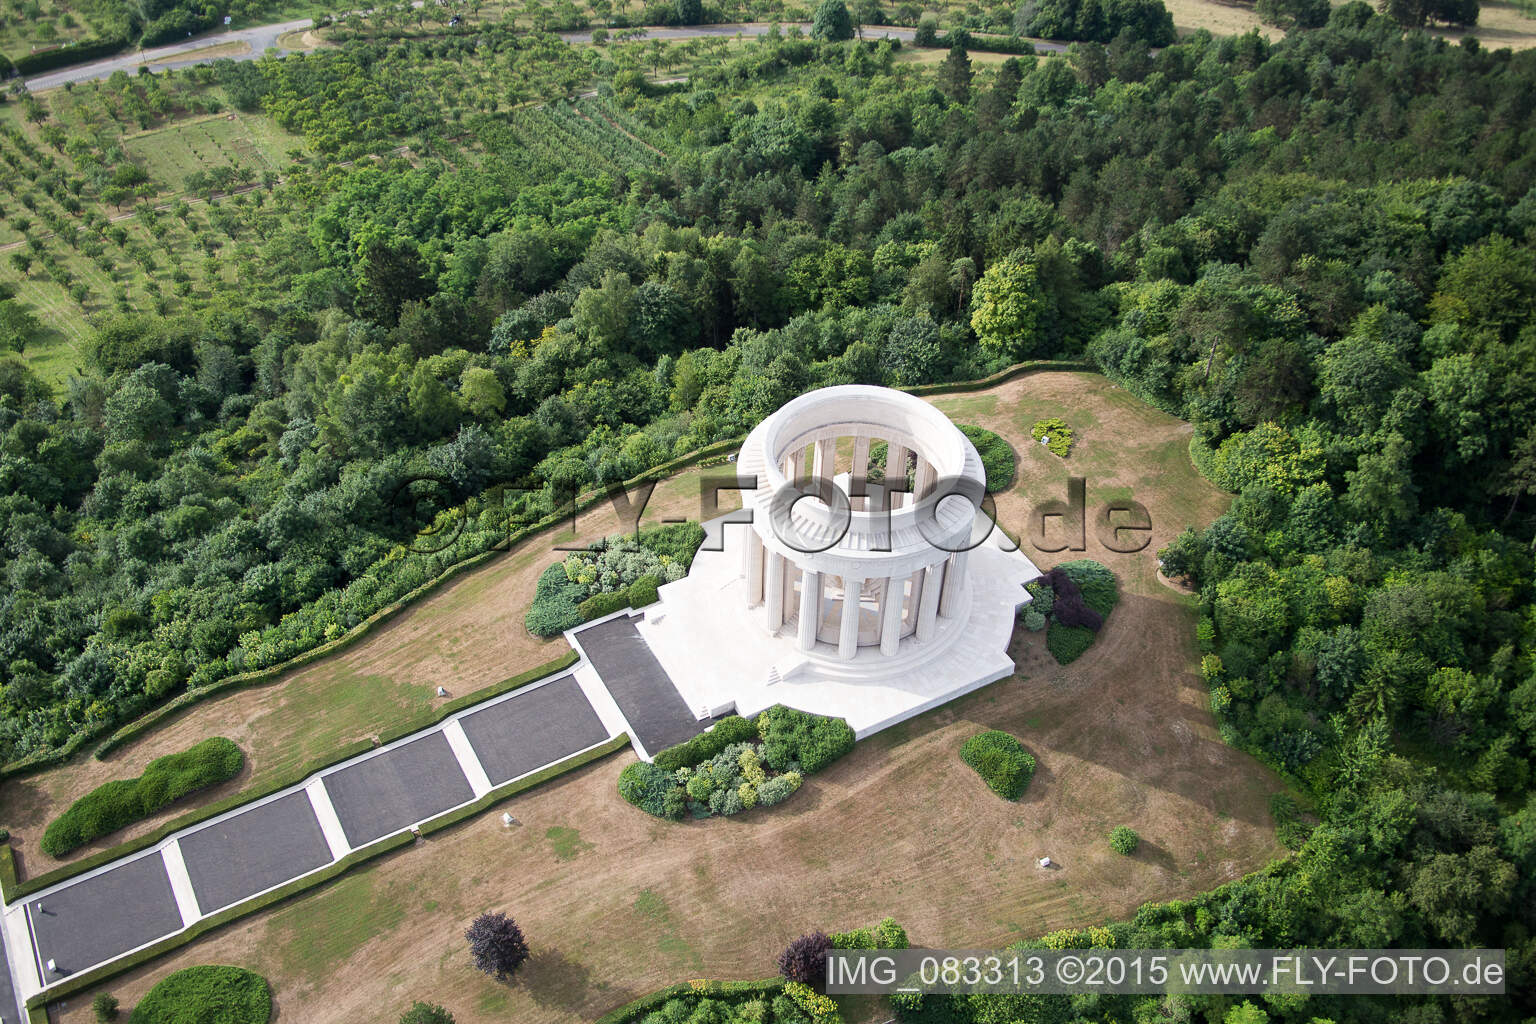 Drone image of American War Memorial in Montsec in the state Meuse, France